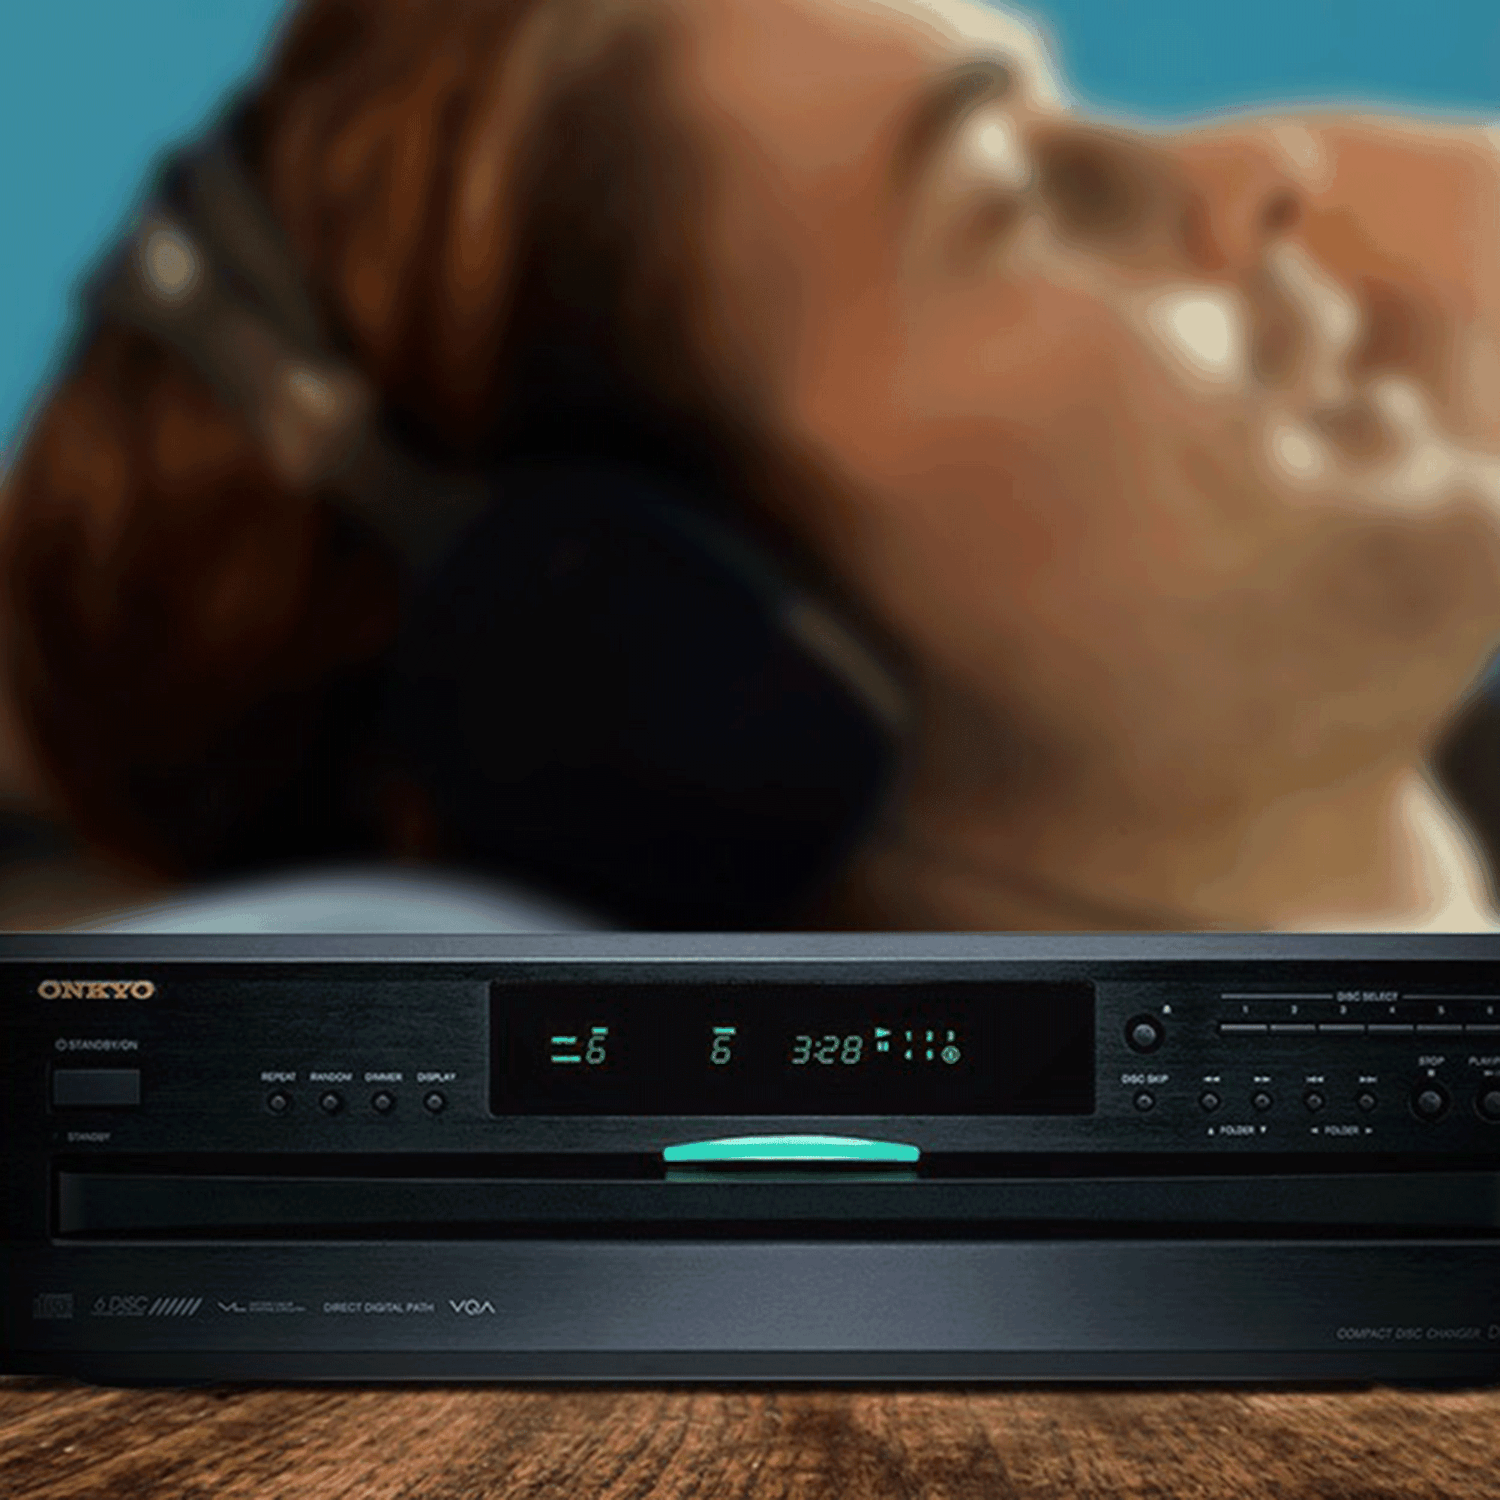 https://onkyo.imgix.net/general/Person-Relaxing-Listening-to-Music-on-Onkyo-DXC390_2000x2000.png?auto=format&crop=focalpoint&domain=onkyo.imgix.net&fit=crop&fp-x=0.5&fp-y=0.5&h=1500&ixlib=php-3.3.1&q=82&w=1500